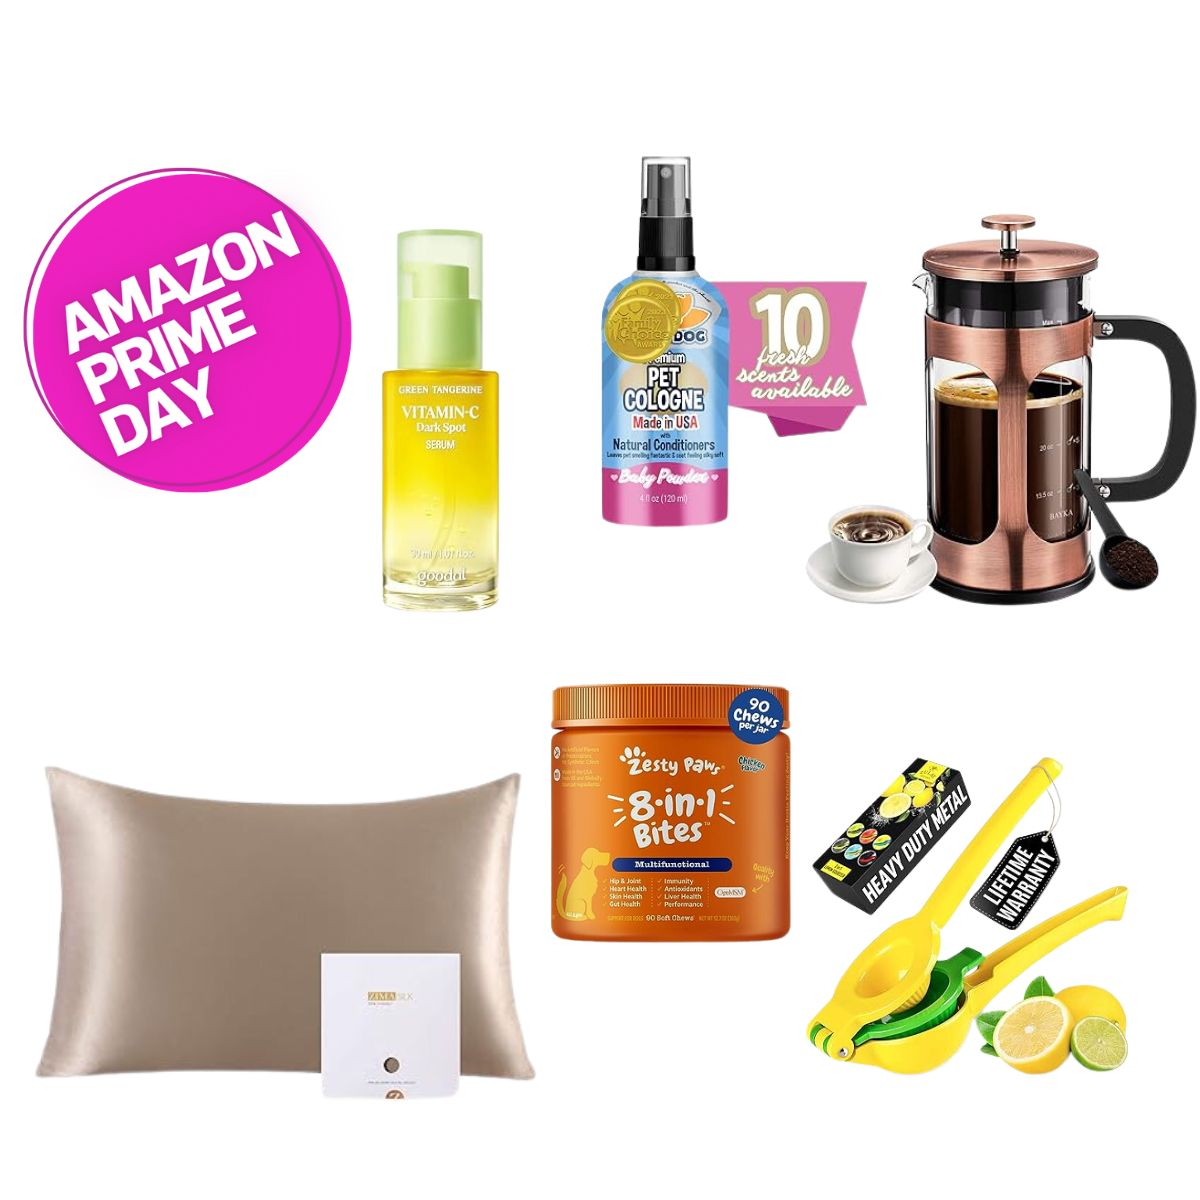 https://akns-images.eonline.com/eol_images/Entire_Site/2023910/rs_1200x1200-231010160451-Copy_of_Amazon_Prime_Day_Sticker_1200_x_1200_px.jpg?fit=around%7C100:100&output-quality=90&crop=100:100;center,top